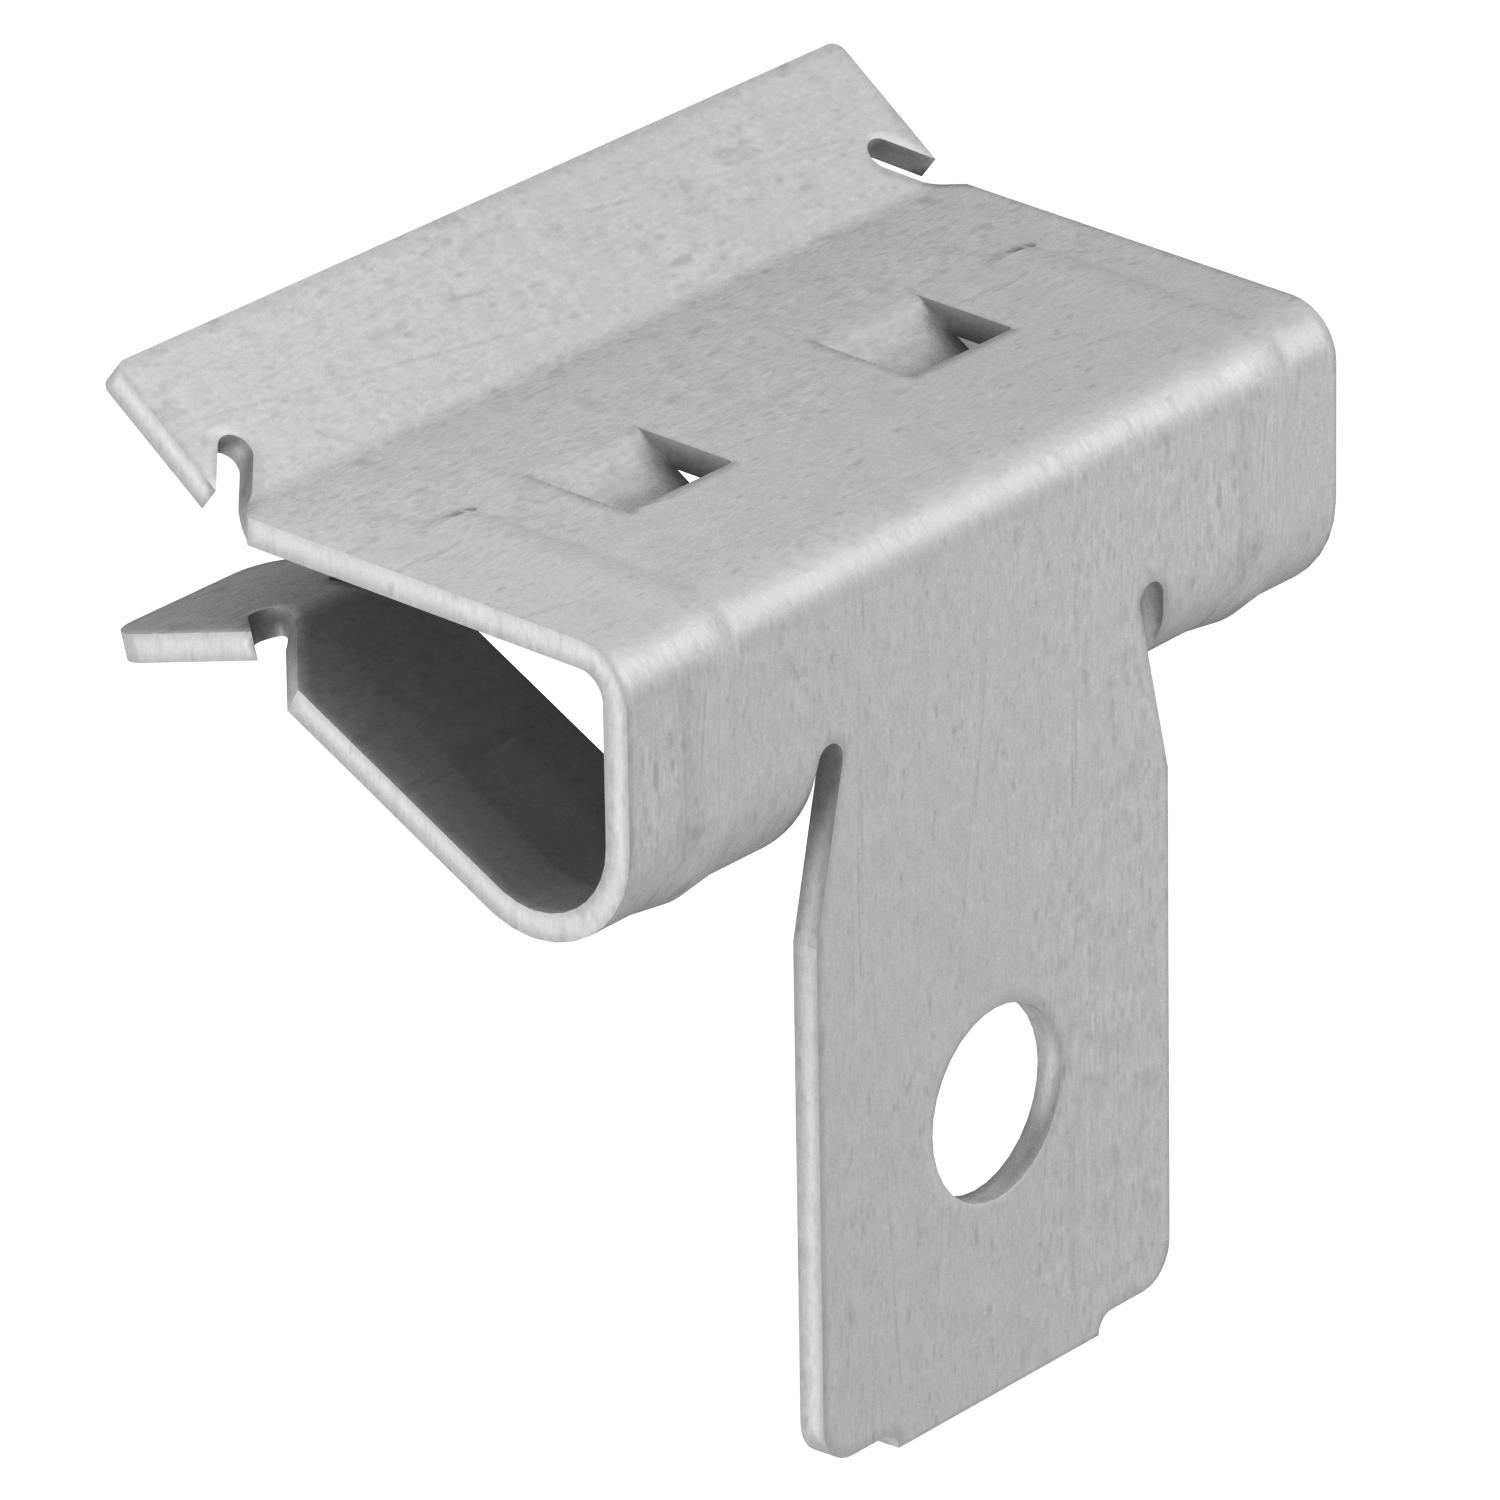 Beam clamp, with fastening hole